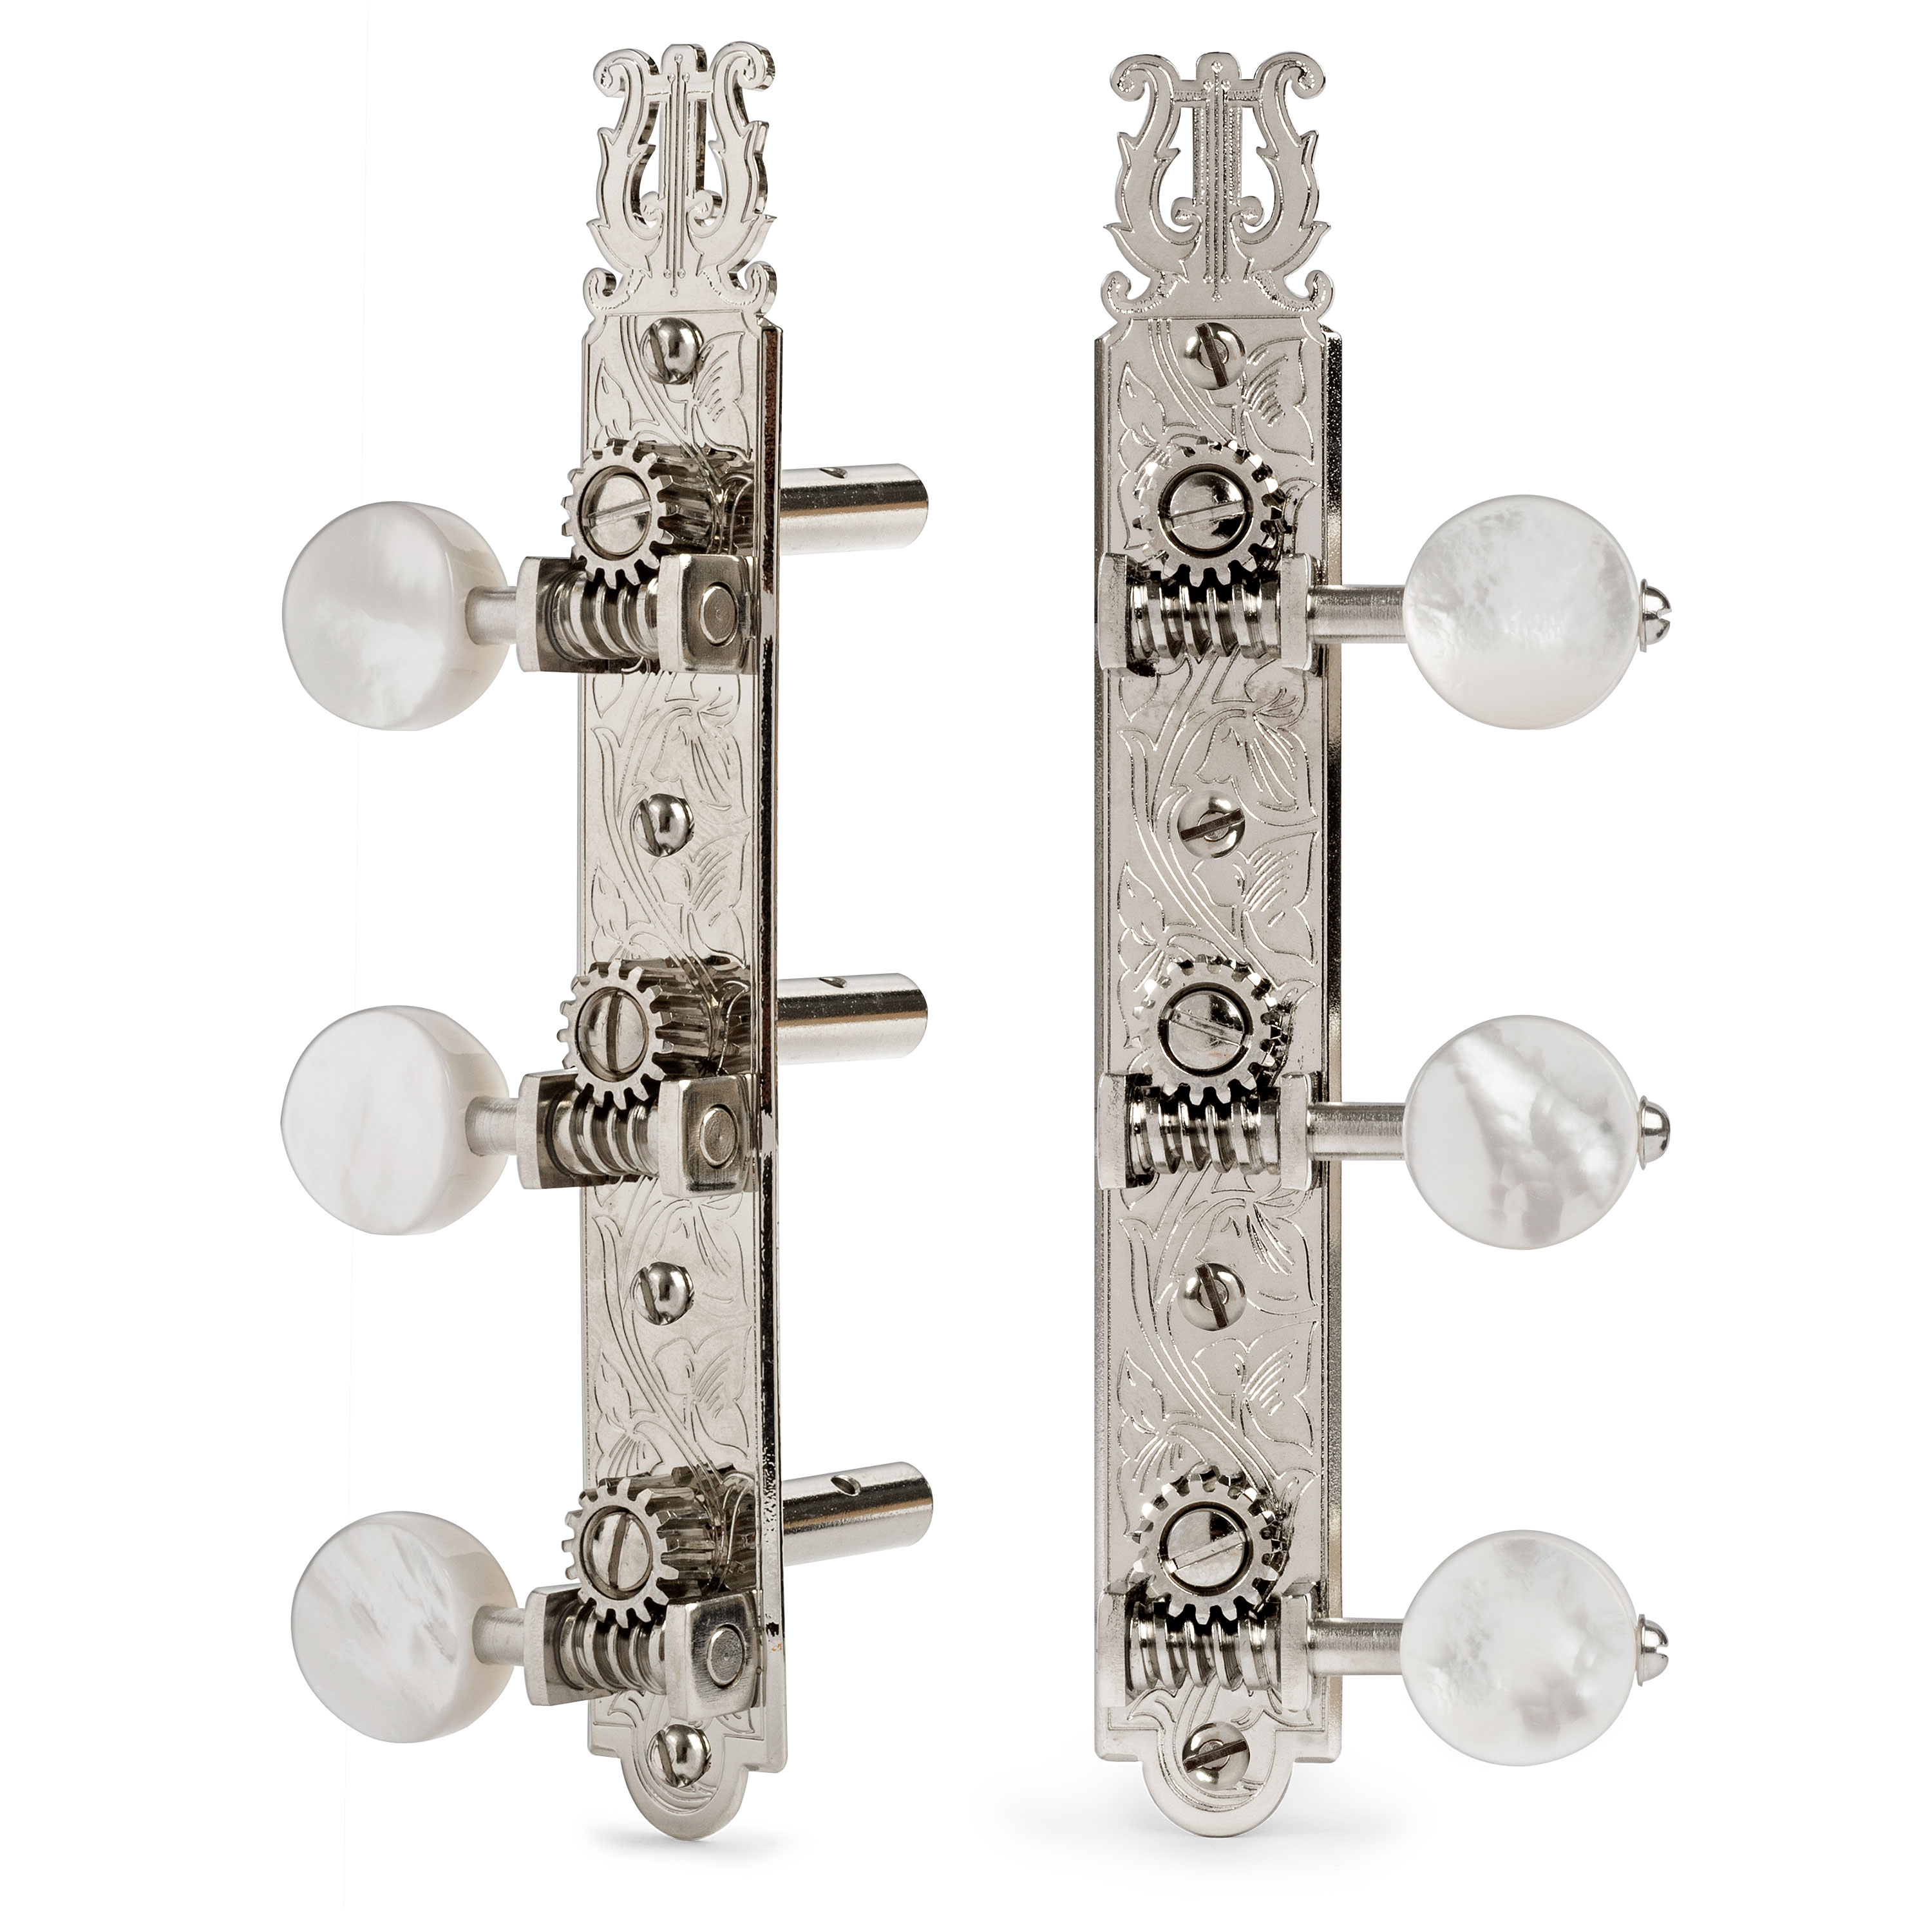 Golden Age 1919 Restoration Guitar Tuners with Mother of Pearl Knobs for Slotted Pegheads